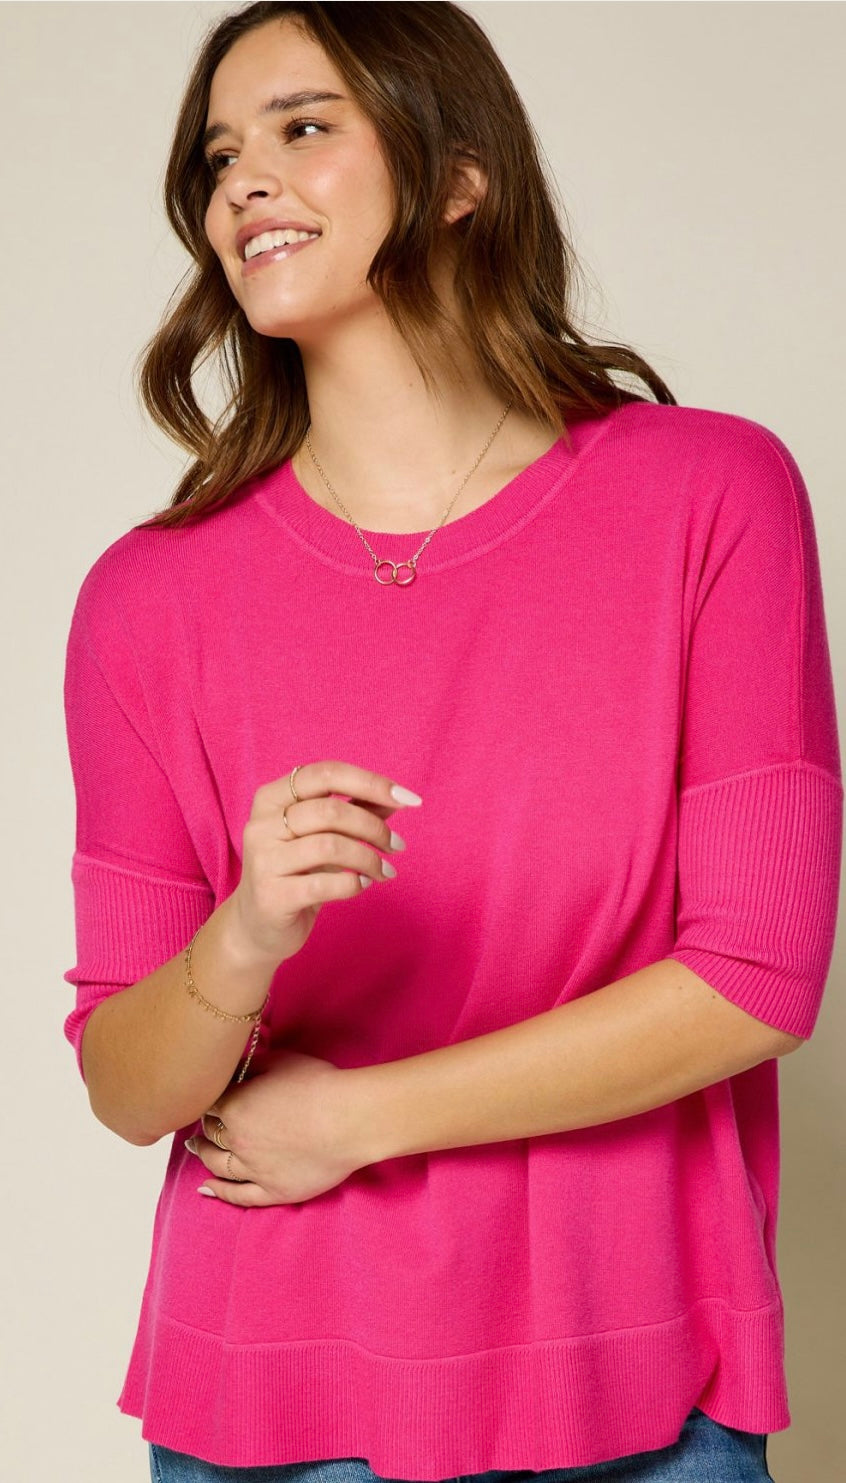 “A Love for Autumn” Sweater Top in Pink